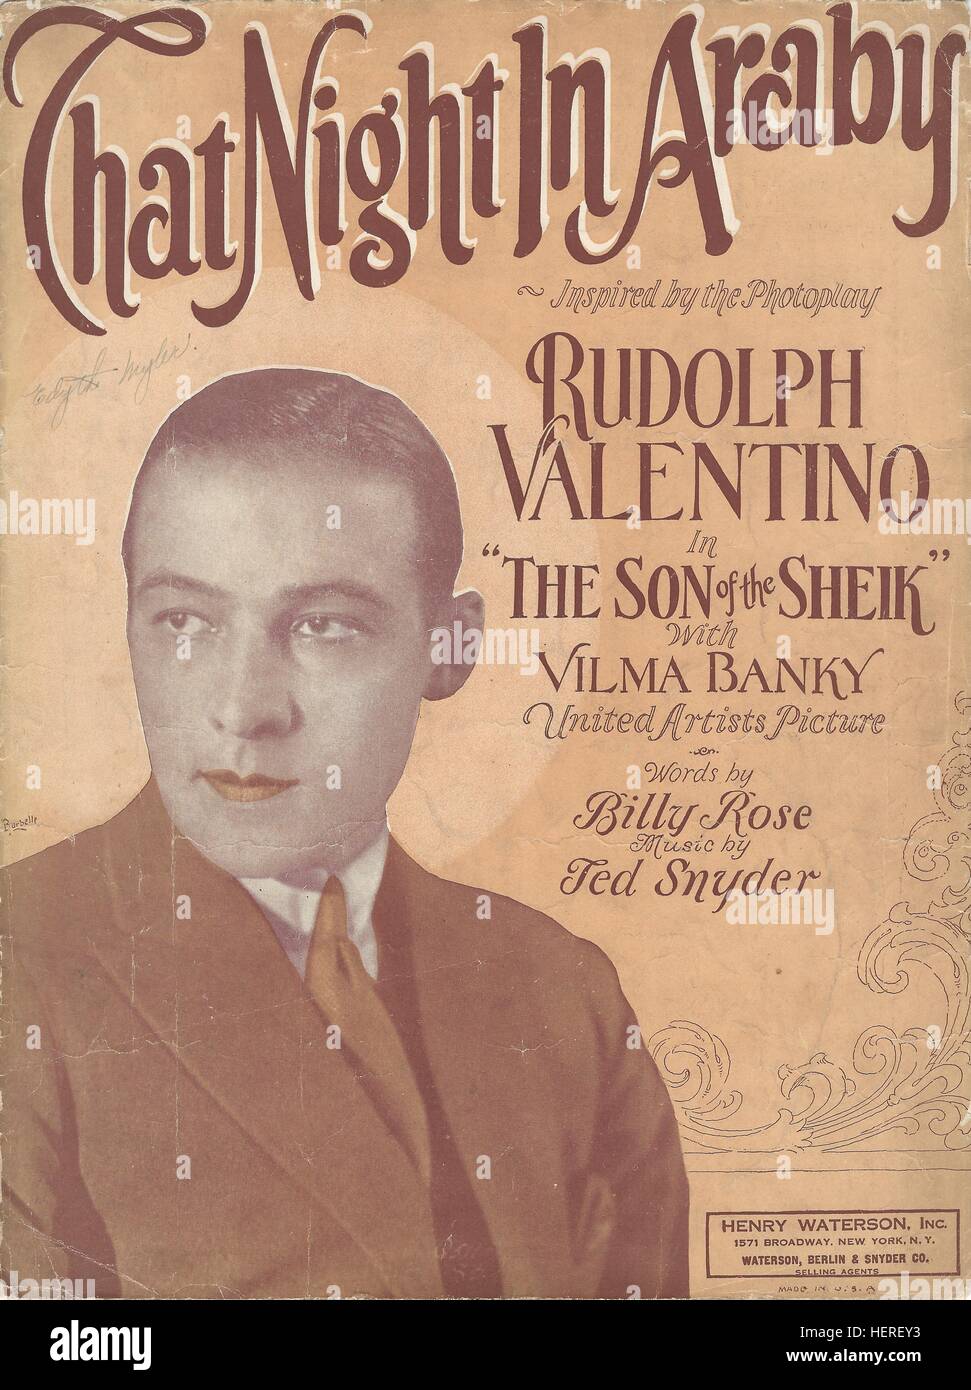 'That Night in Araby' 1926 Rudolph Valentino 'The Son of the Sheik' Movie Sheet Music Cover Stock Photo